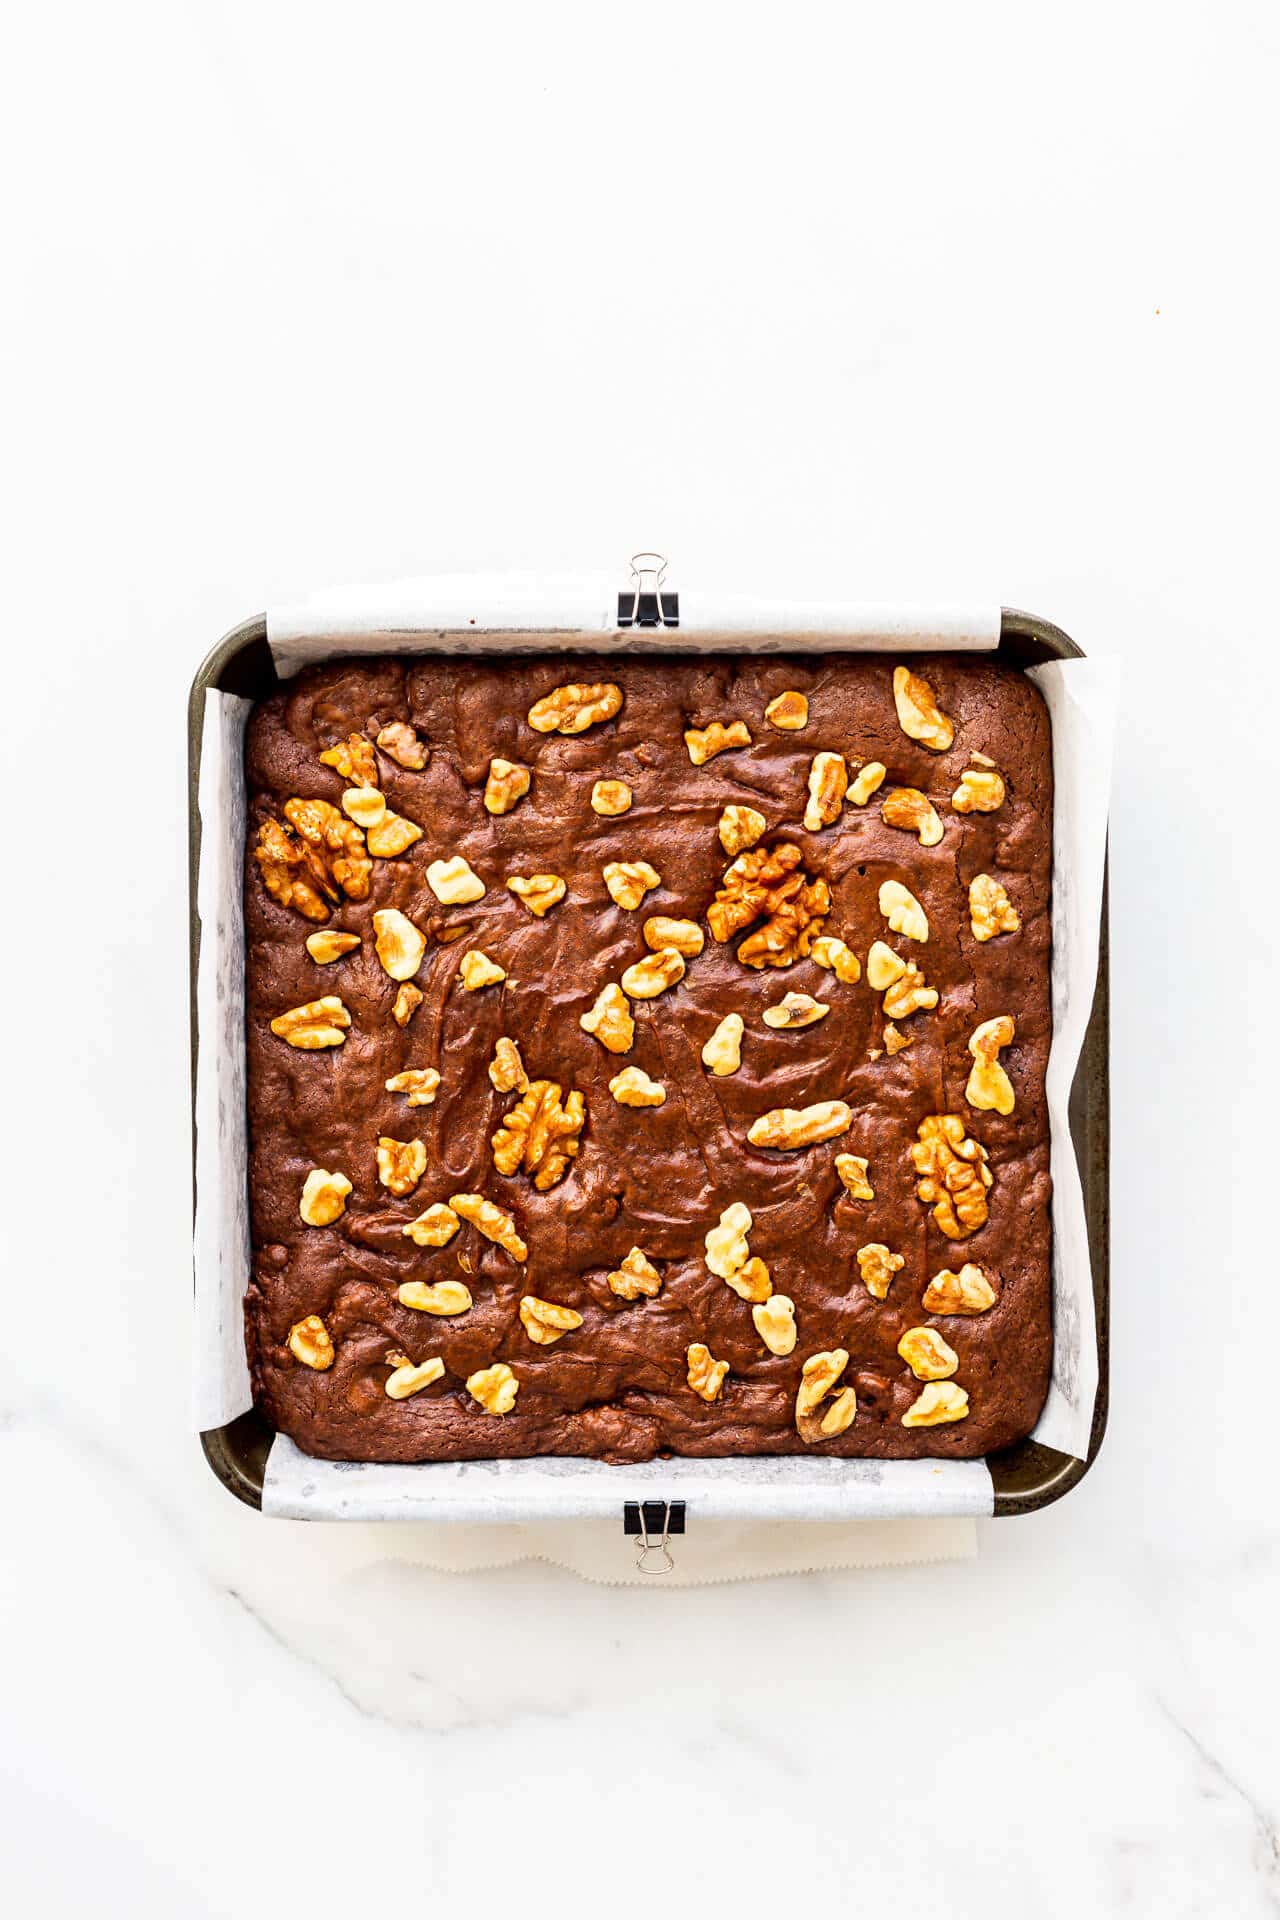 A pan of brownies with walnuts, freshly baked.